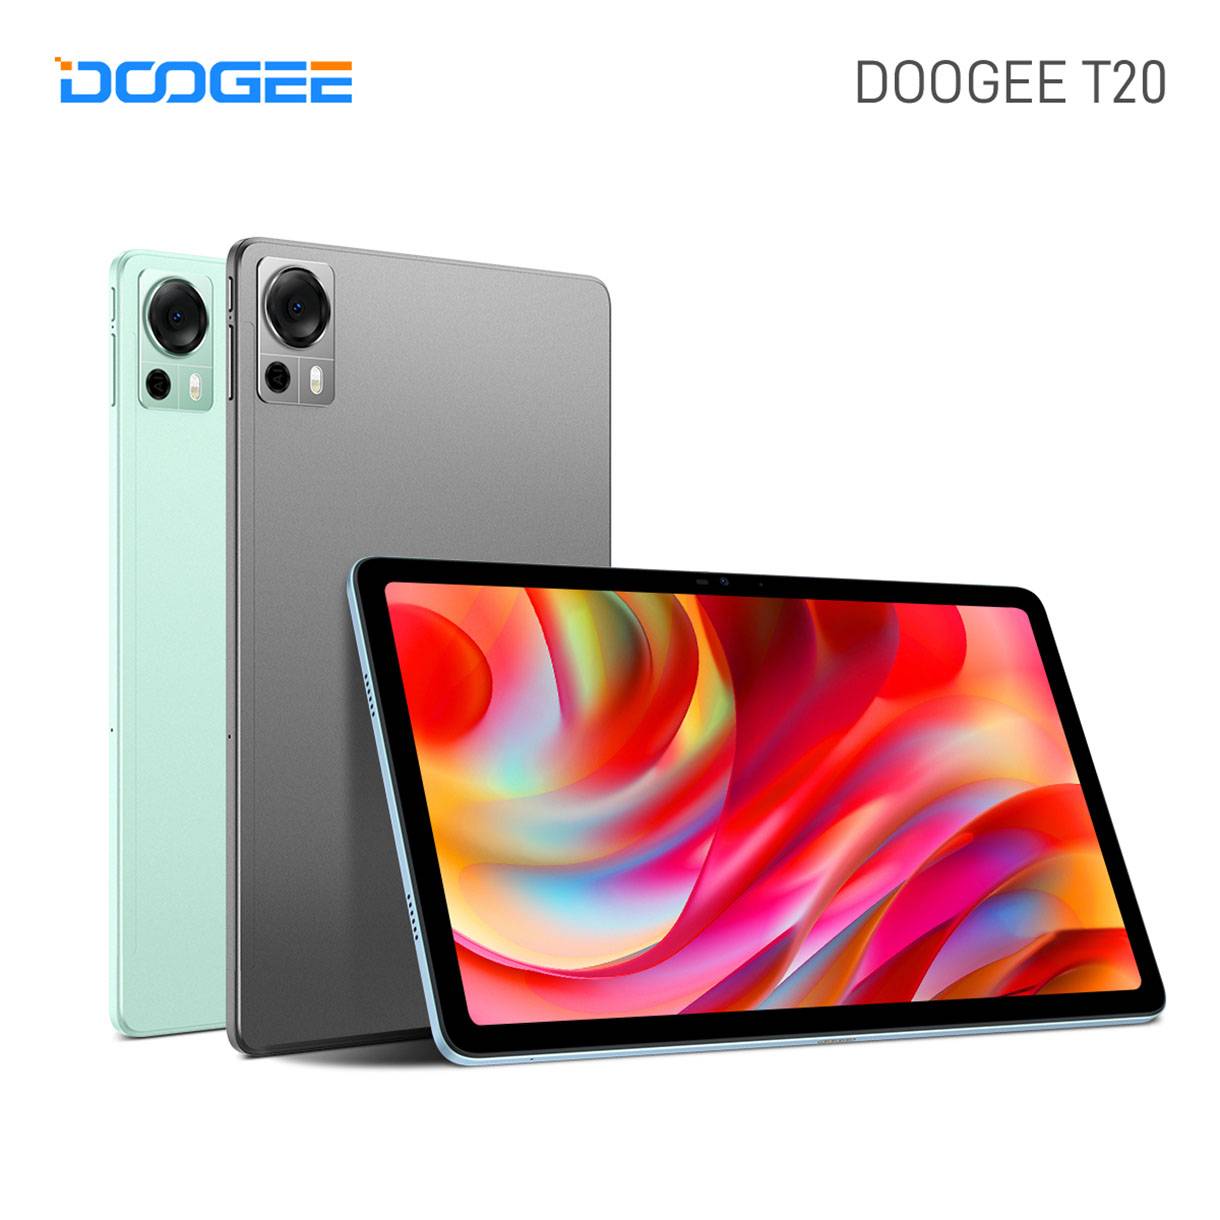 Doogee T20 tablet with 2K display will launch later this month